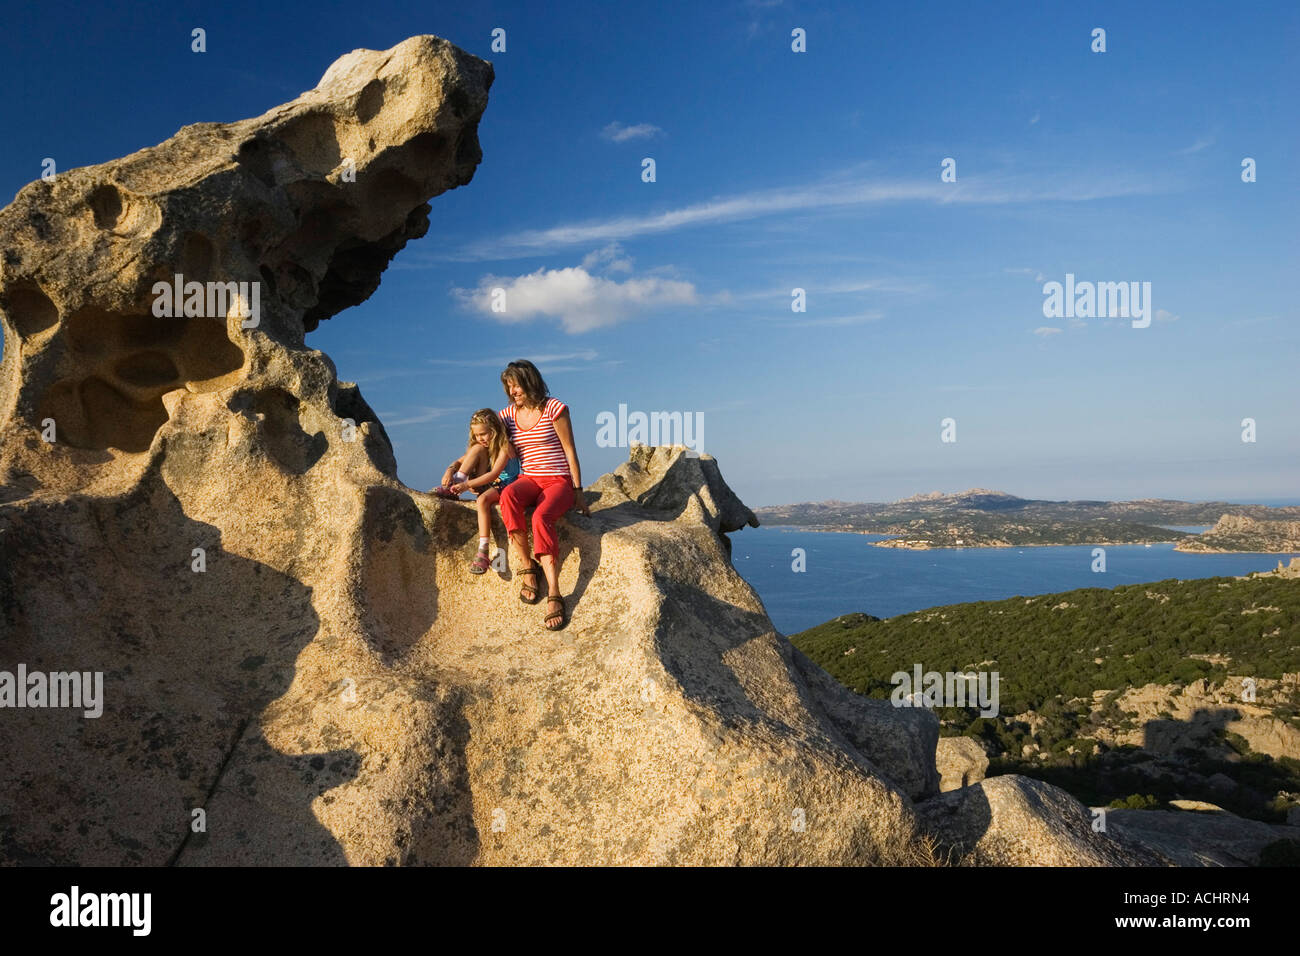 Mother and daughter on rock, Capo d'Orso, Sardinia, Italy Stock Photo